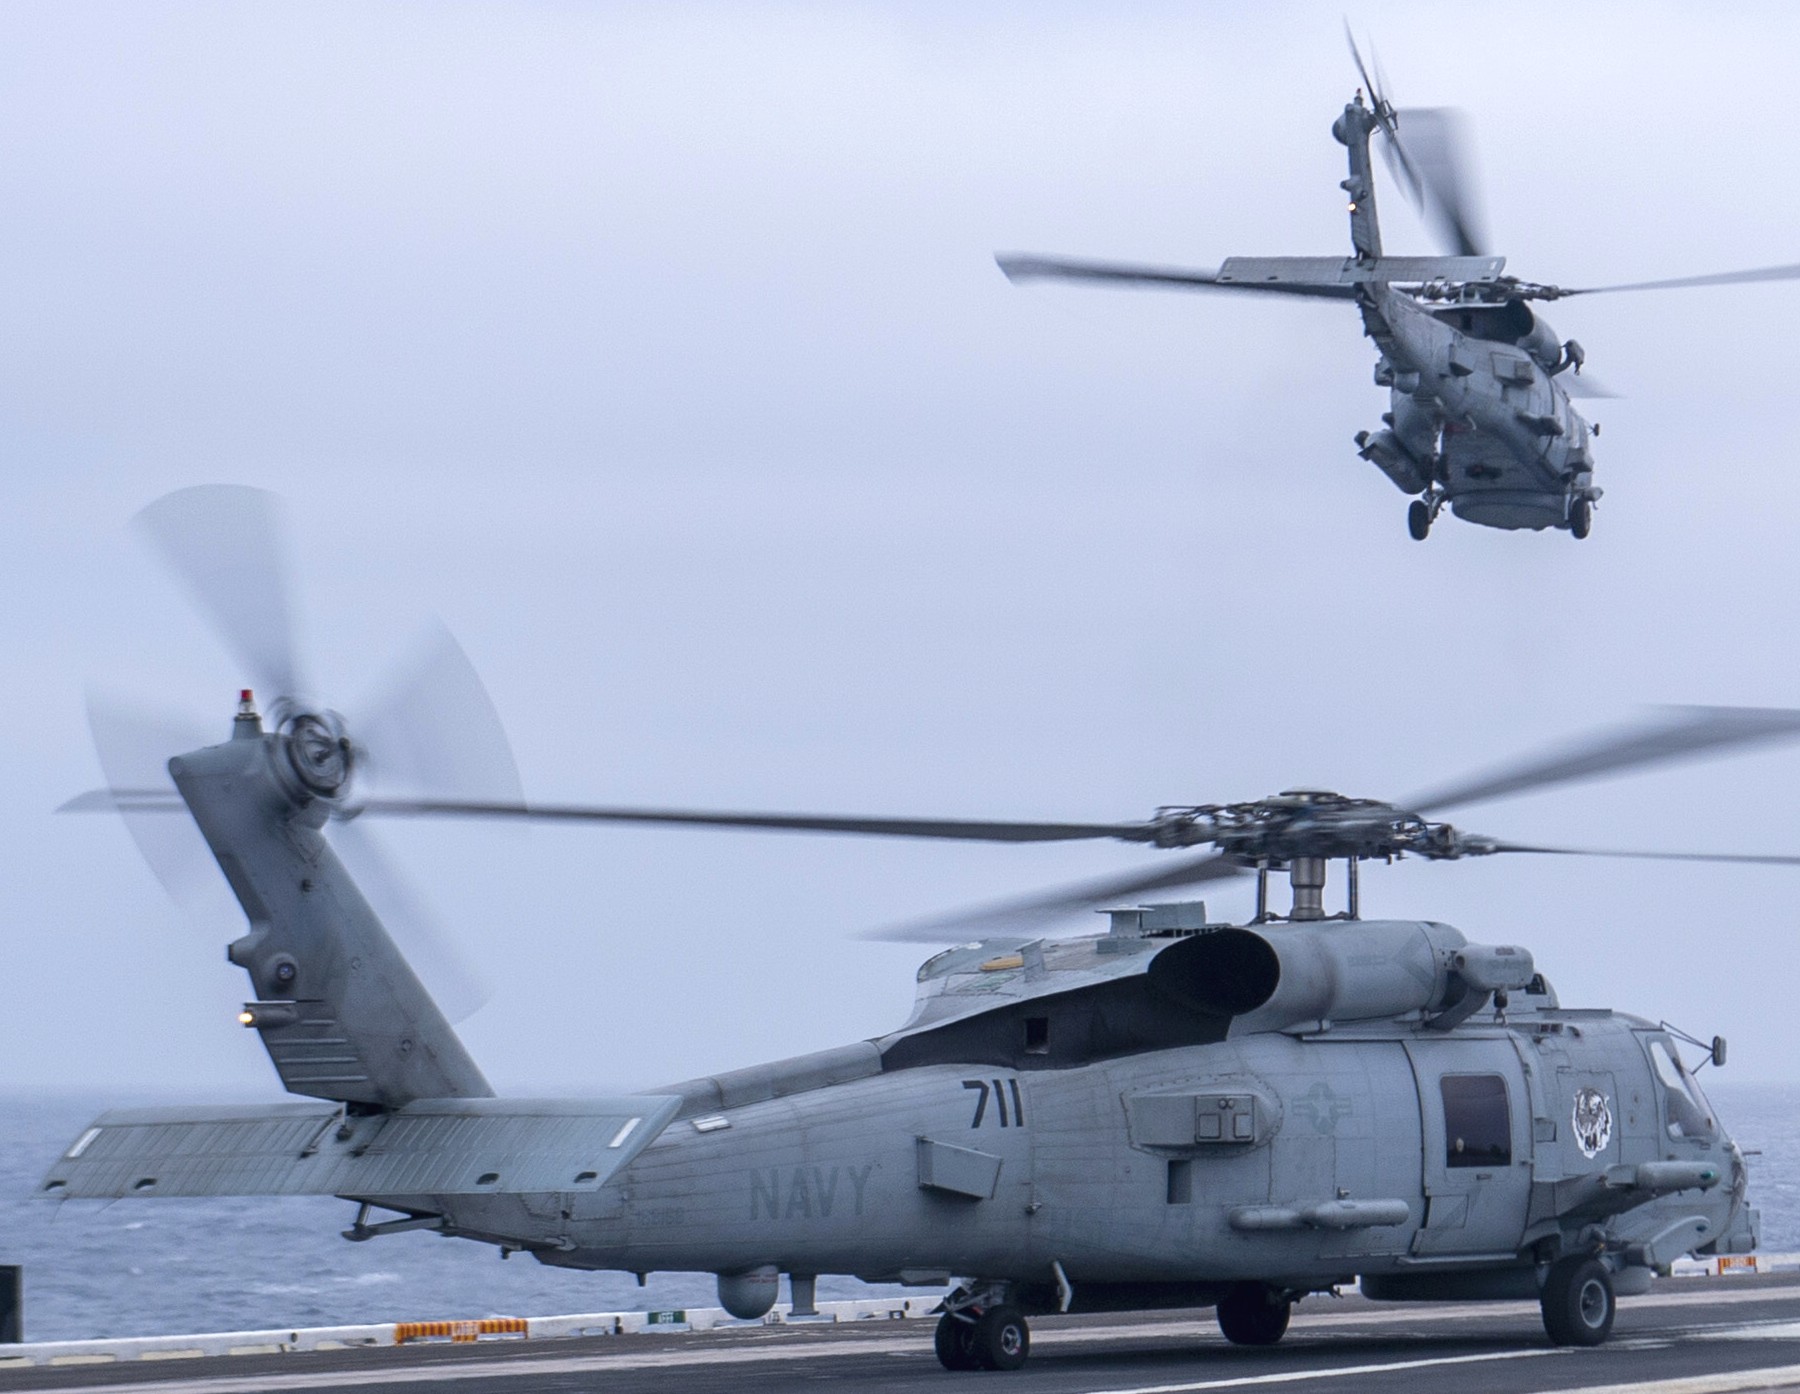 hsm-73 battlecats helicopter maritime strike squadron us navy mh-60r seahawk 2017 71